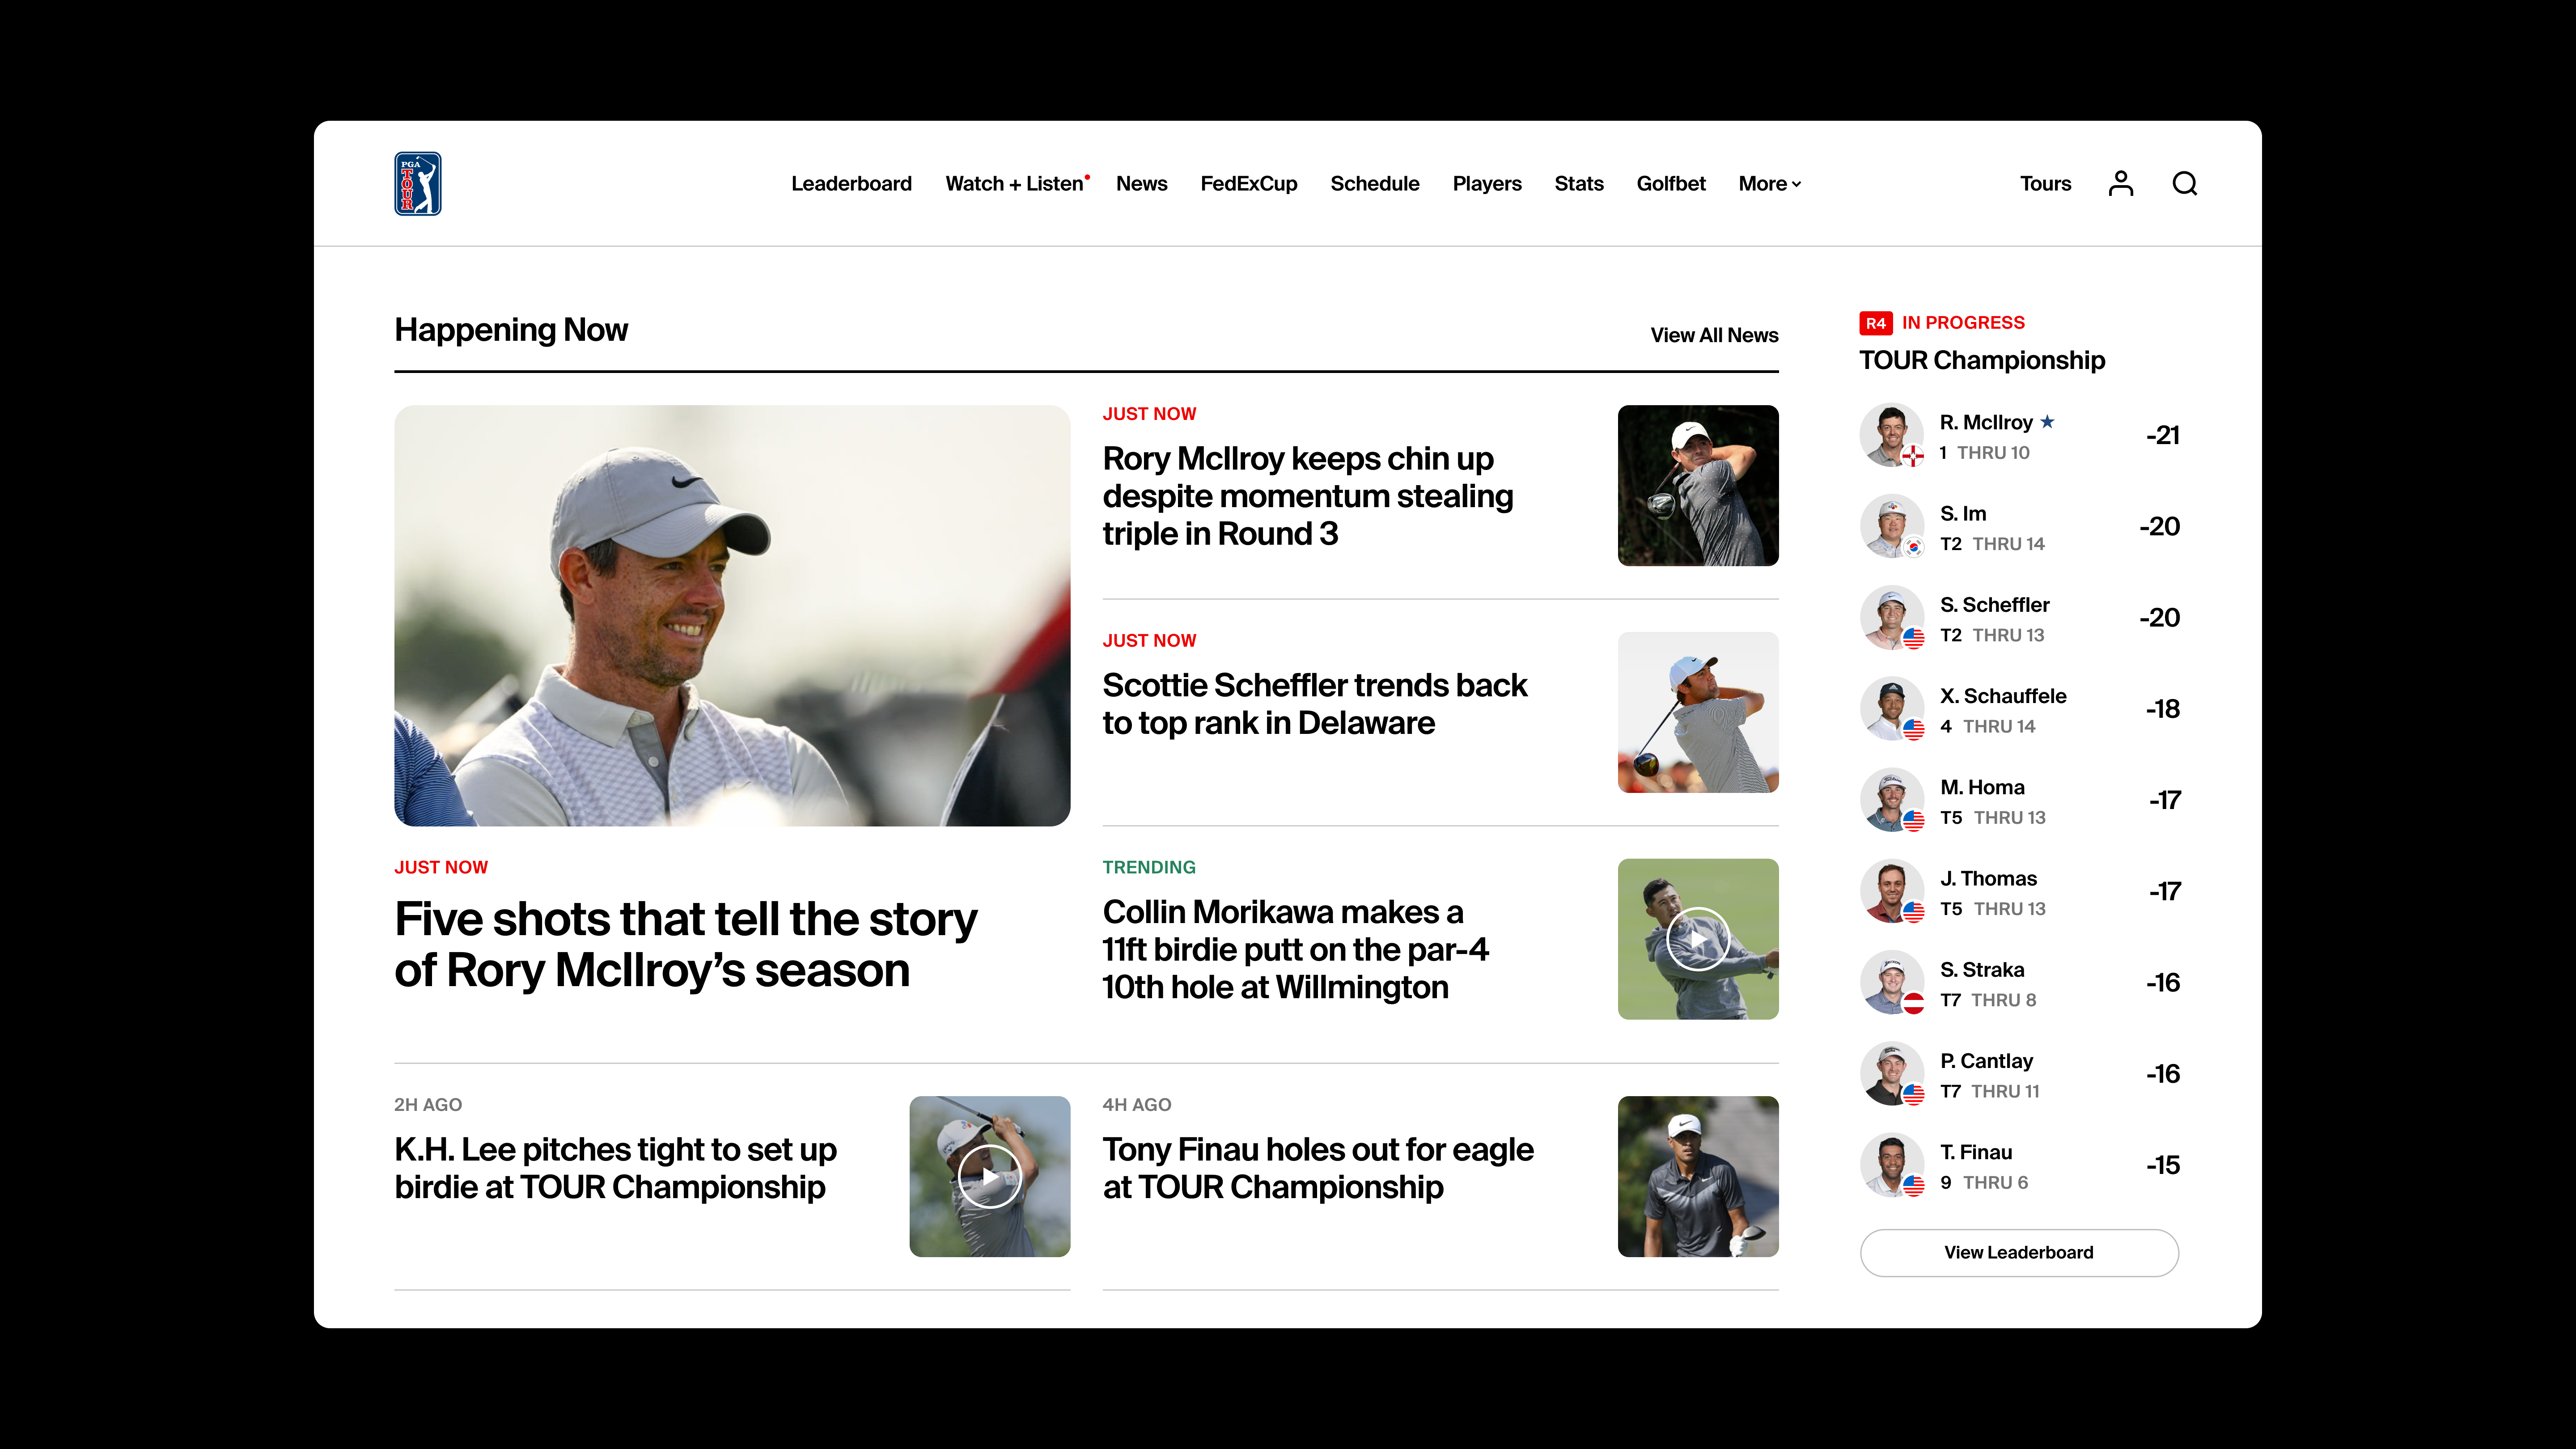 PGA TOUR Set to Launch New Website to Accompany Recently Relaunched Mobile App